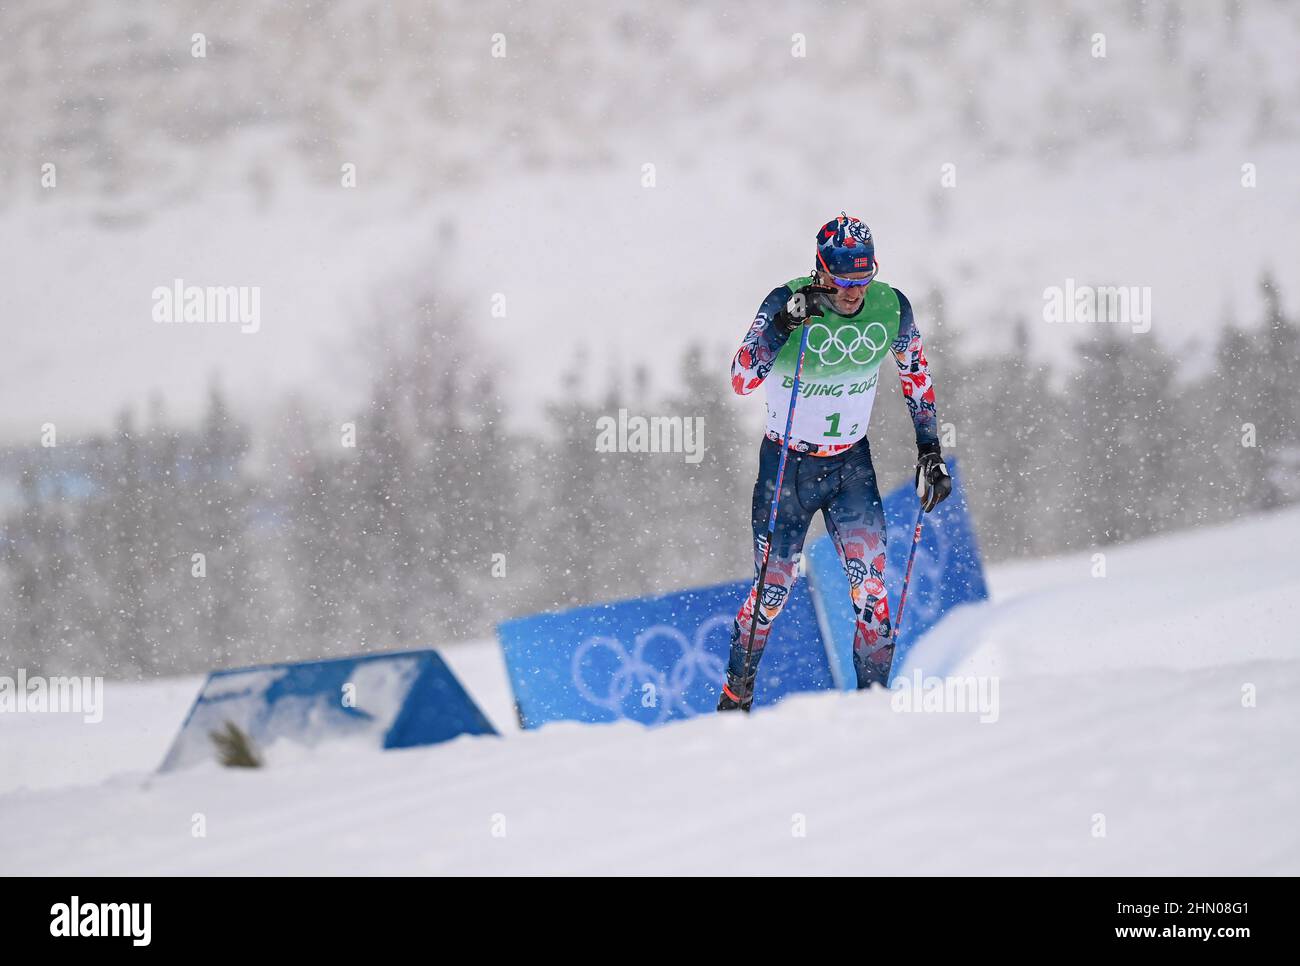 Zhangjiakou, China's Hebei Province. 13th Feb, 2022. Paal Golberg of Norway competes during the cross-country skiing men's 4x10 km relay of the Beijing Winter Olympics at National Cross-Country Skiing Centre in Zhangjiakou, north China's Hebei Province, Feb. 13, 2022. Credit: Hu Huhu/Xinhua/Alamy Live News Stock Photo